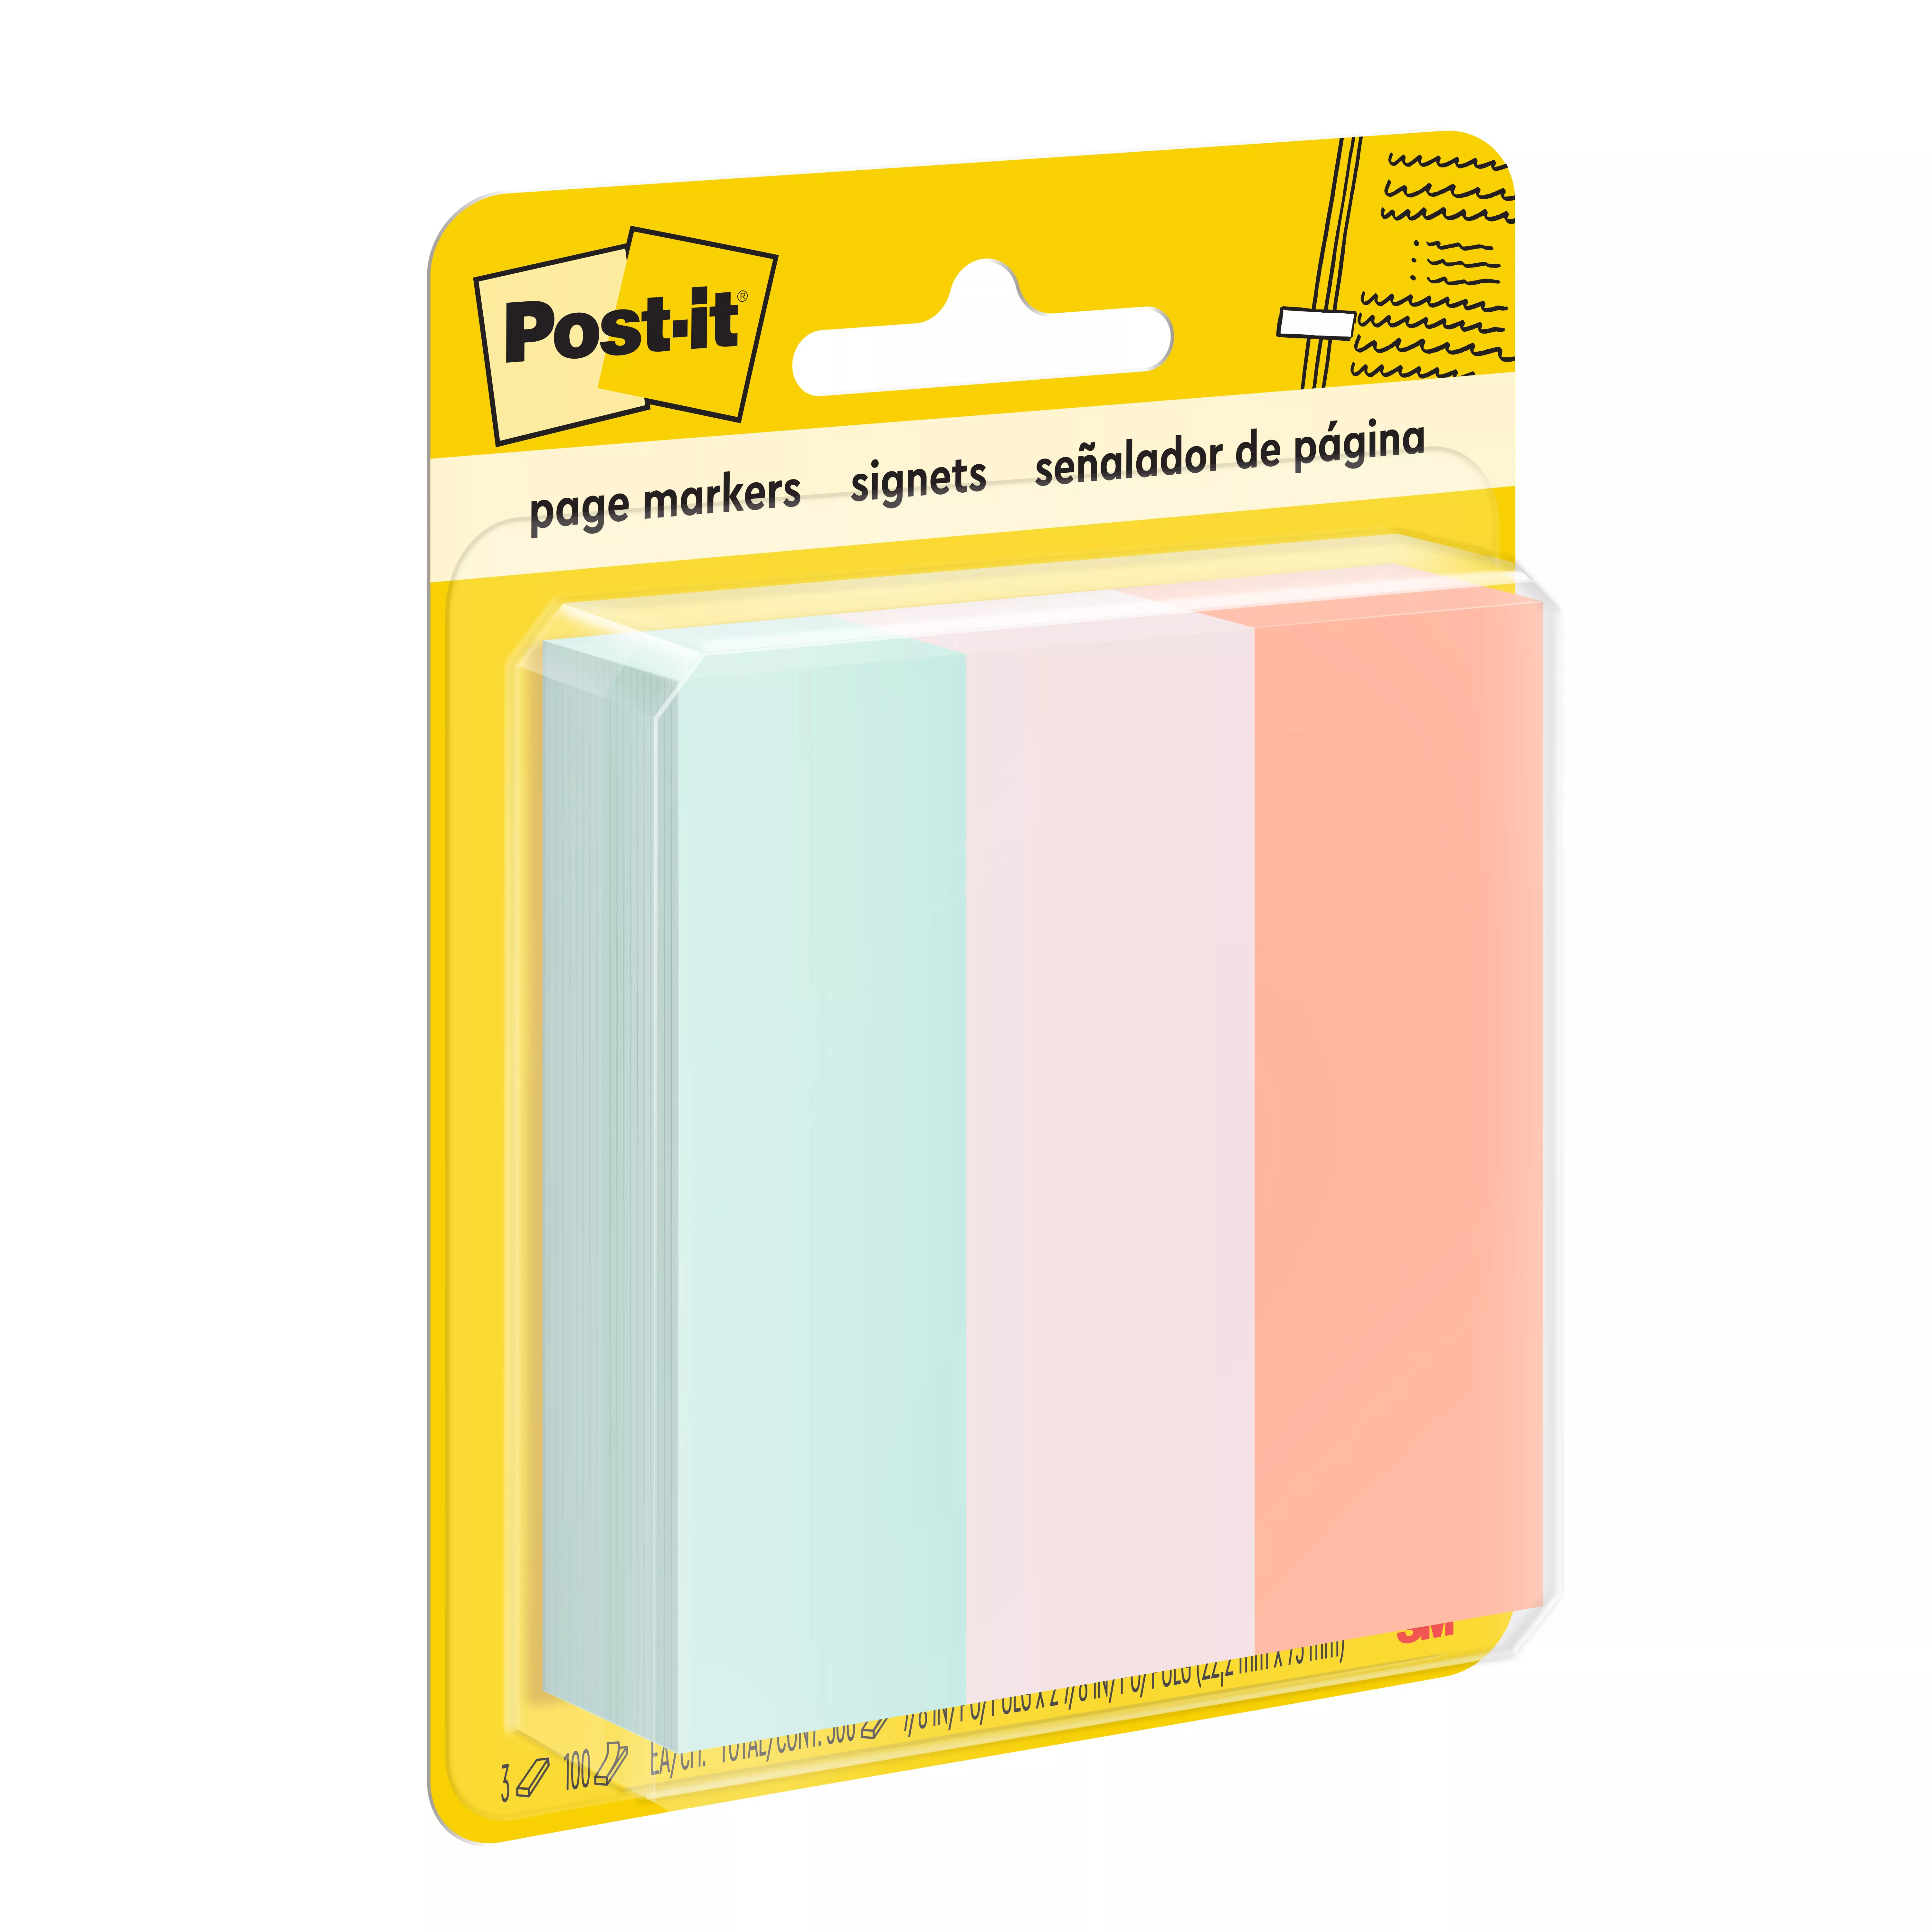 Product Number 5487 | Post-it® Page Markers 5487 7/8 in x 2-7/8 in Neon 100sht/pd